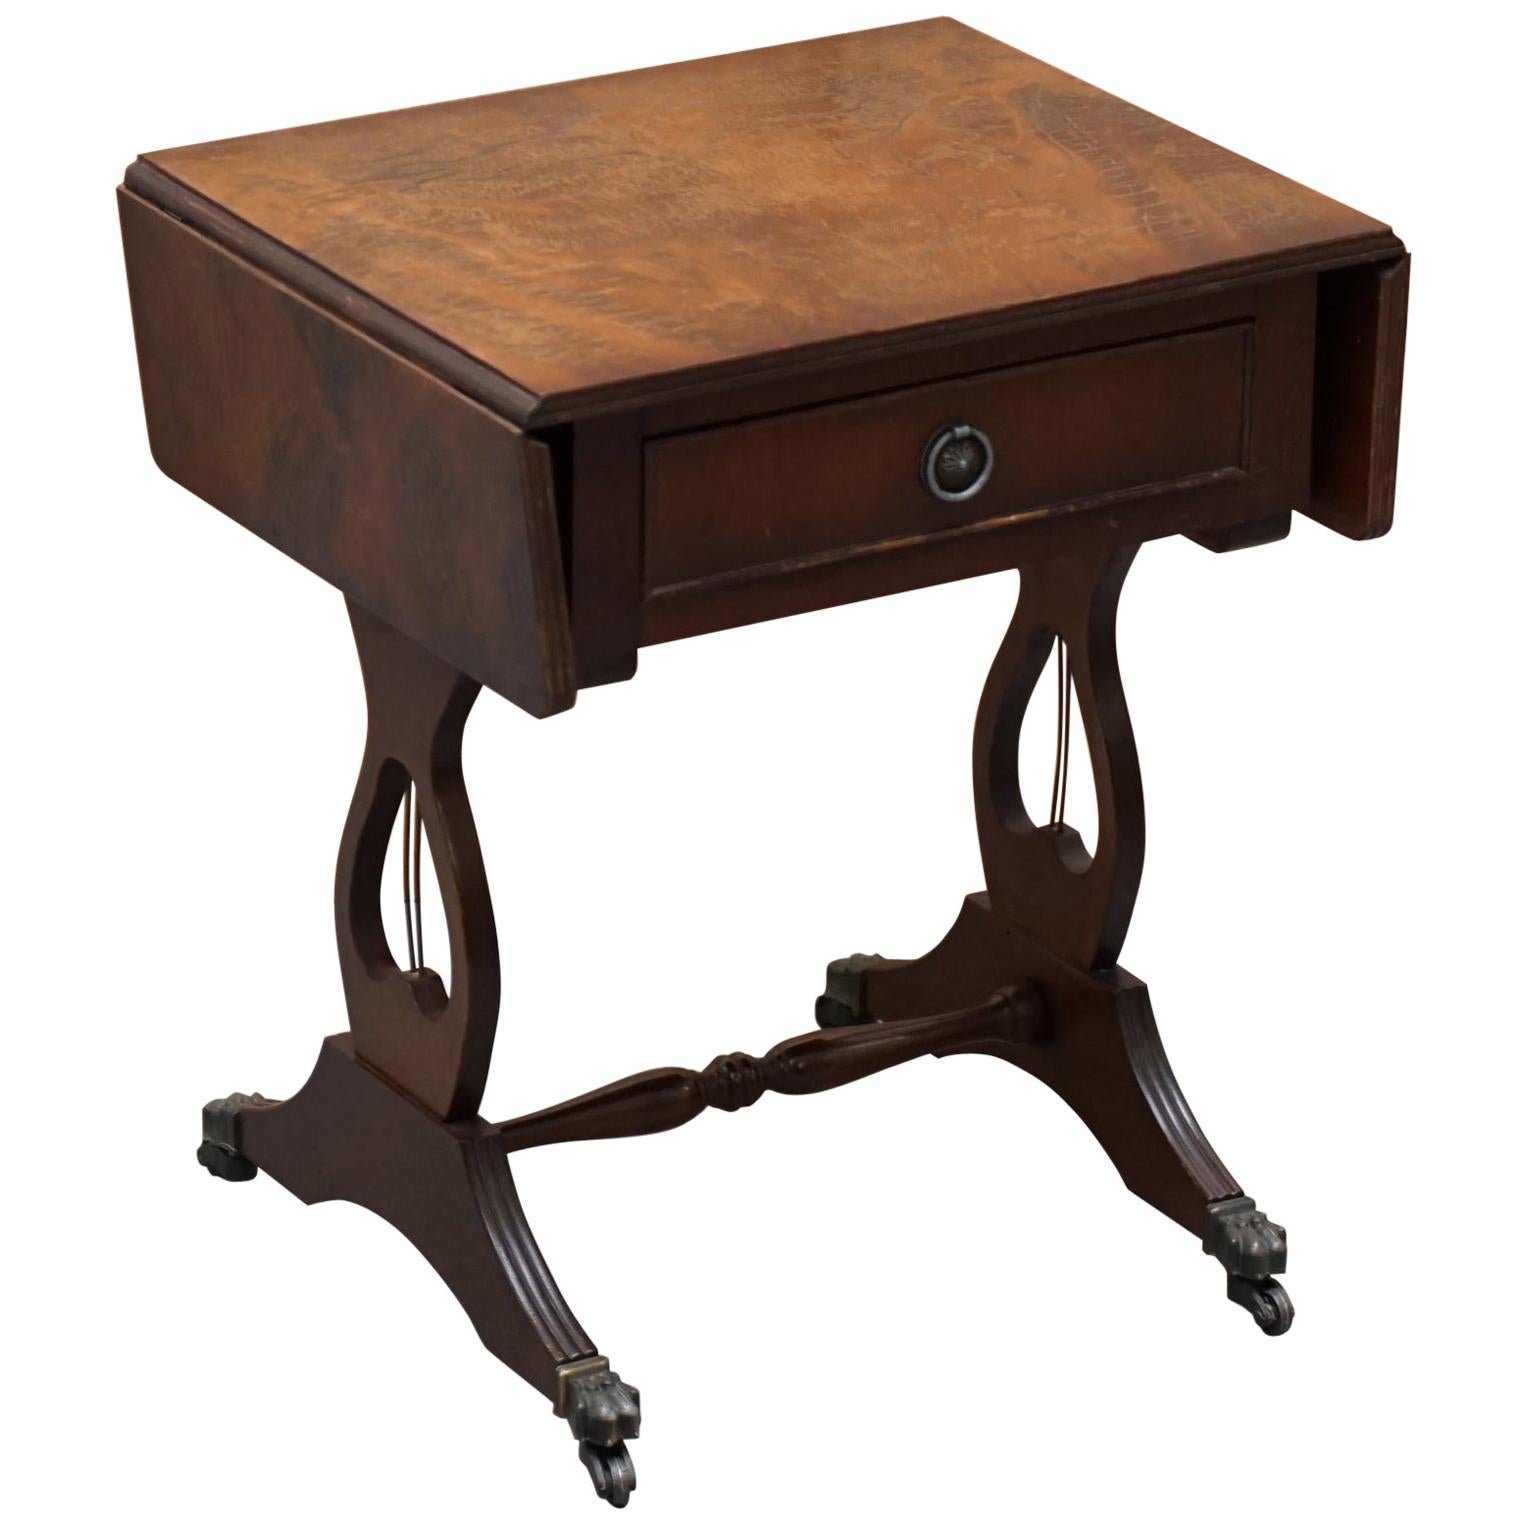 Stunning Small Crackled Hardwood Side Table with Extending Top Great Games Table